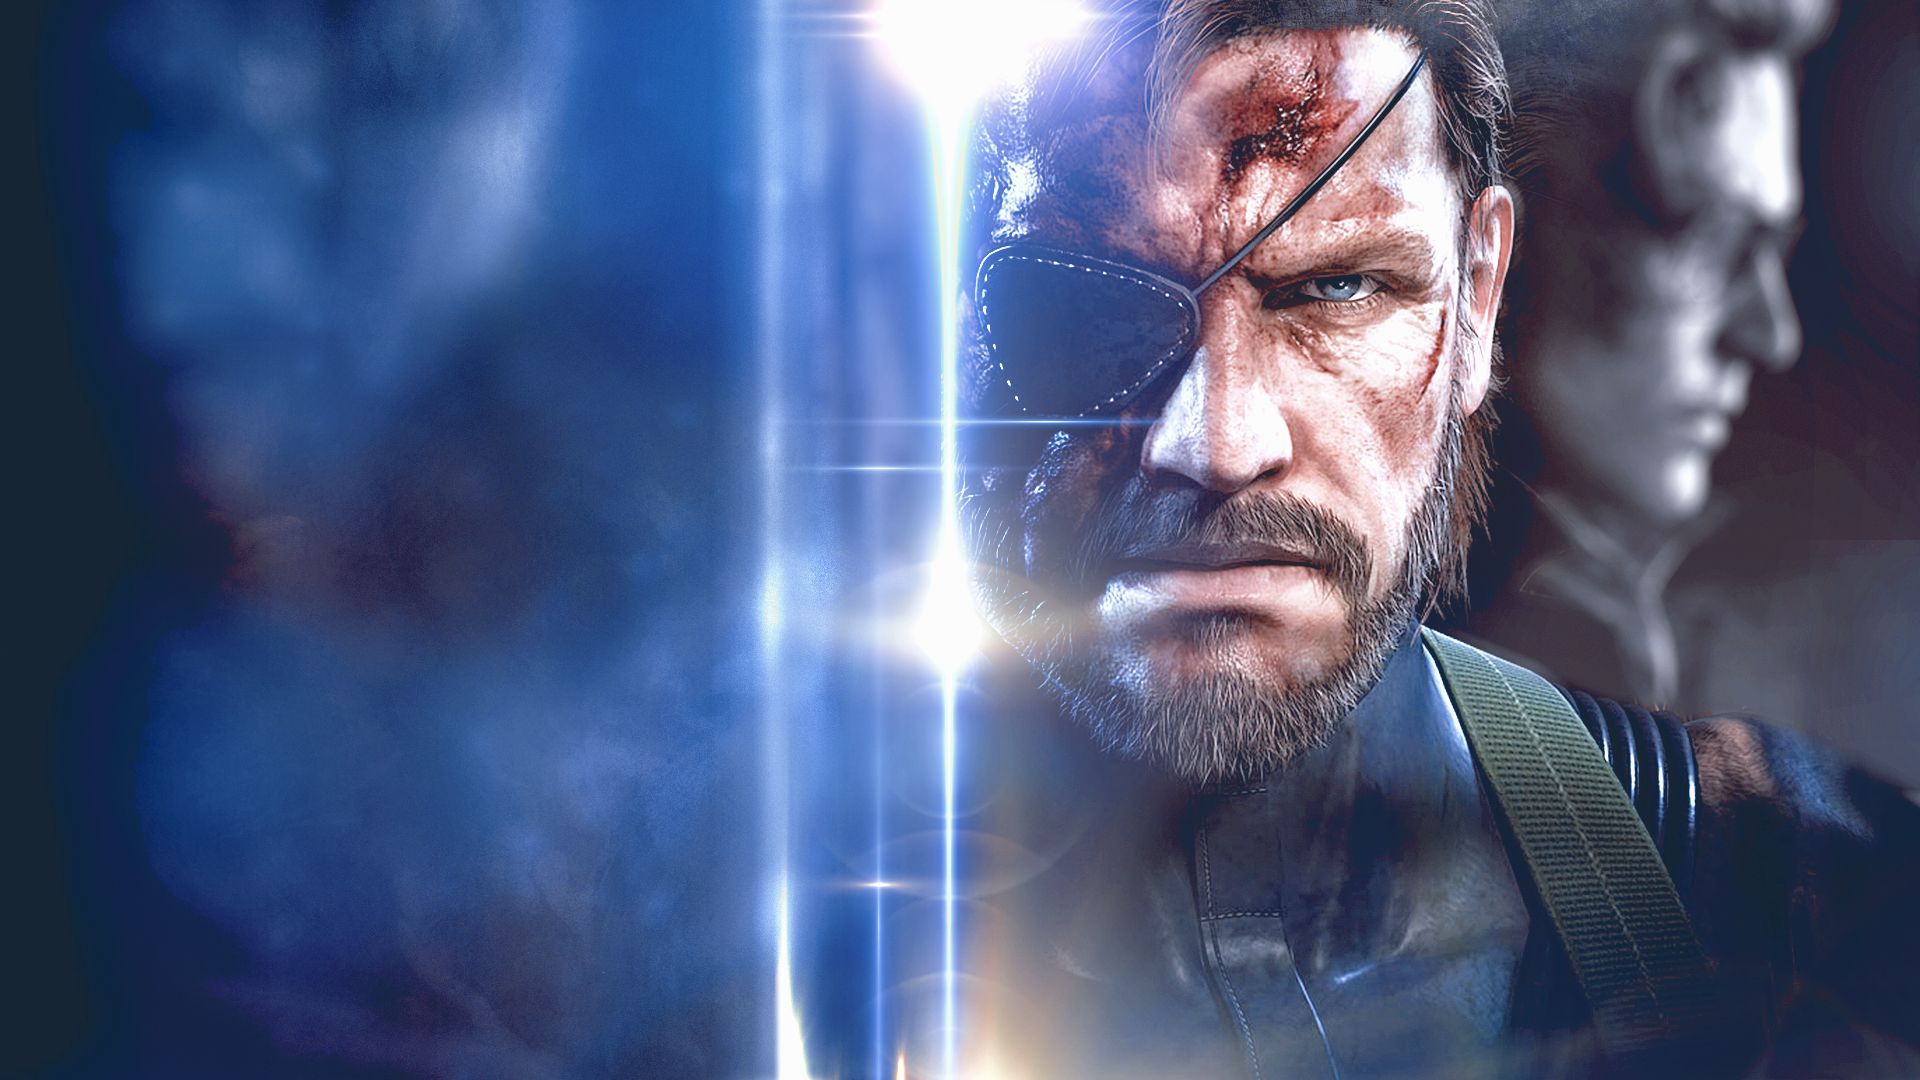 14 Big Boss (Metal Gear Solid) Phone Wallpapers - Mobile Abyss